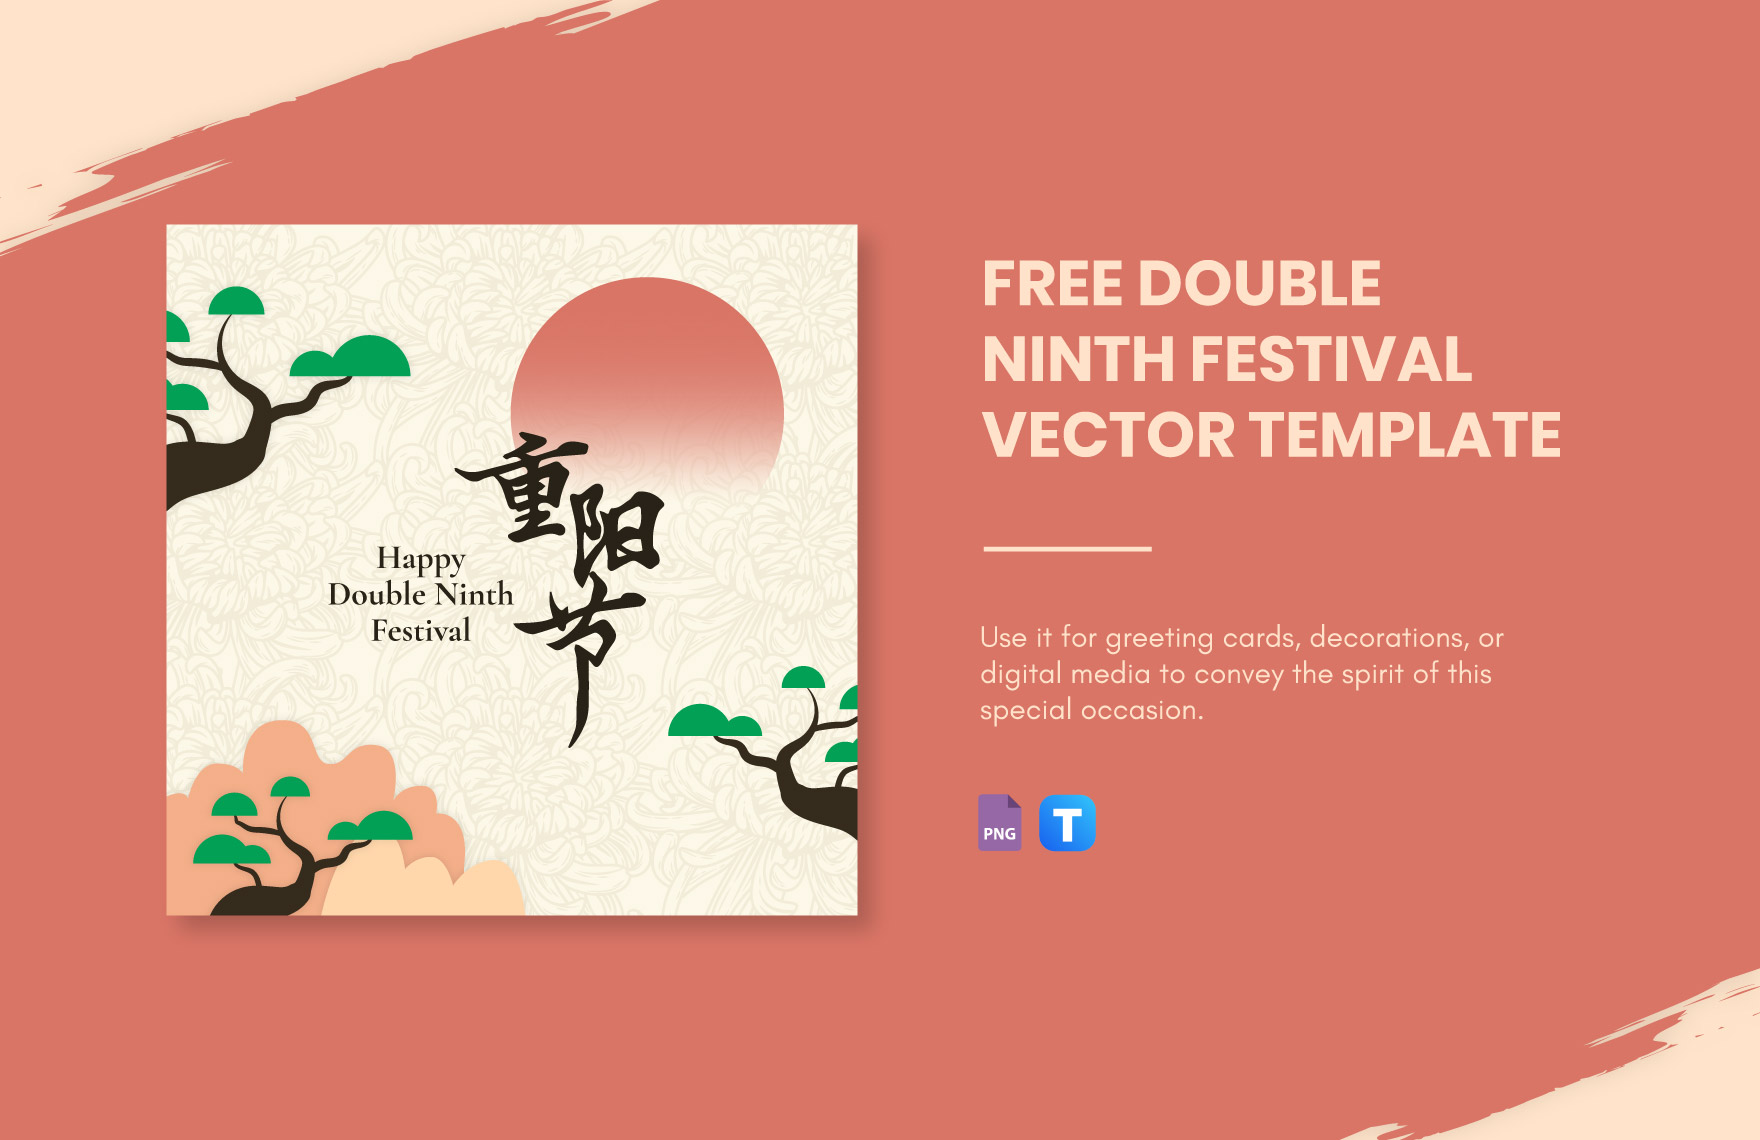 Free Double Ninth Festival Vector  in PNG